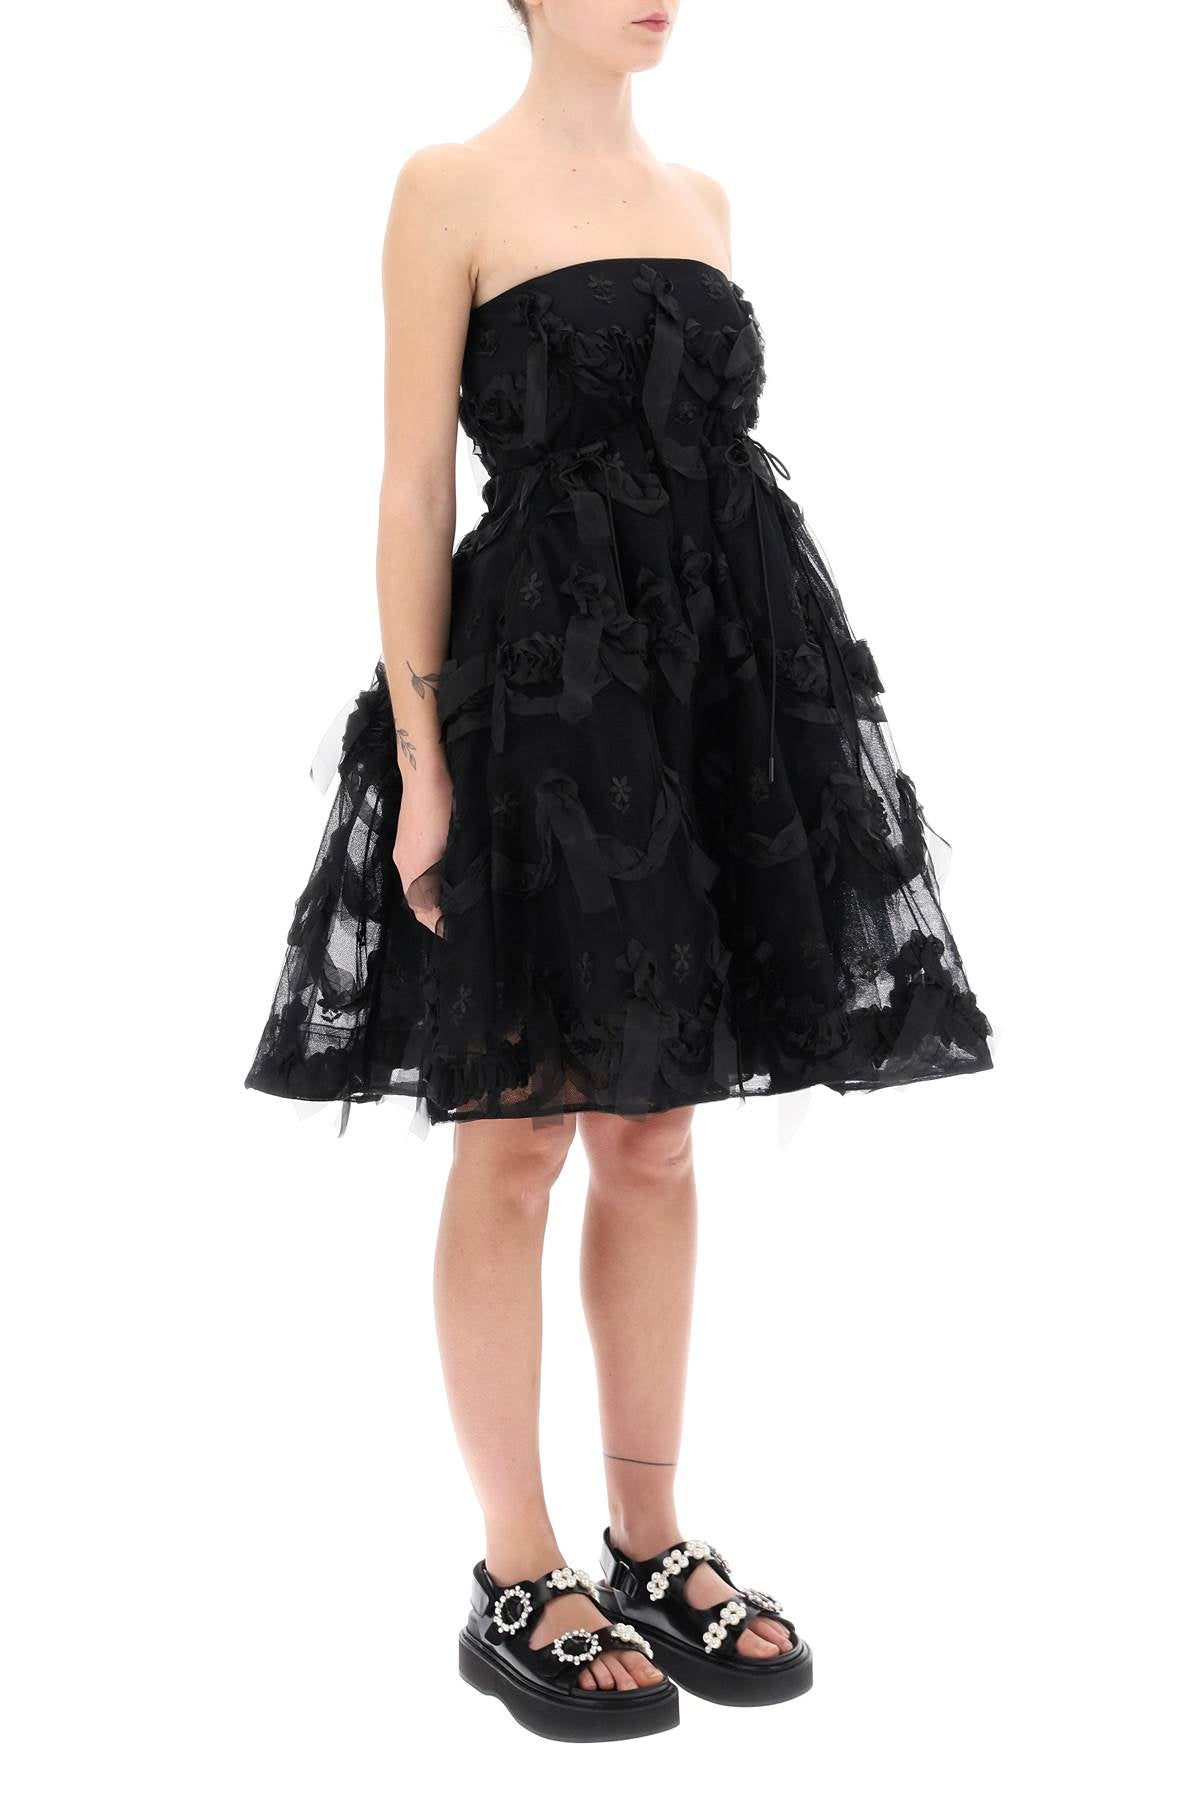 SIMONE ROCHA Elegant Black Tulle Dress with Bow and Floral Embroidery